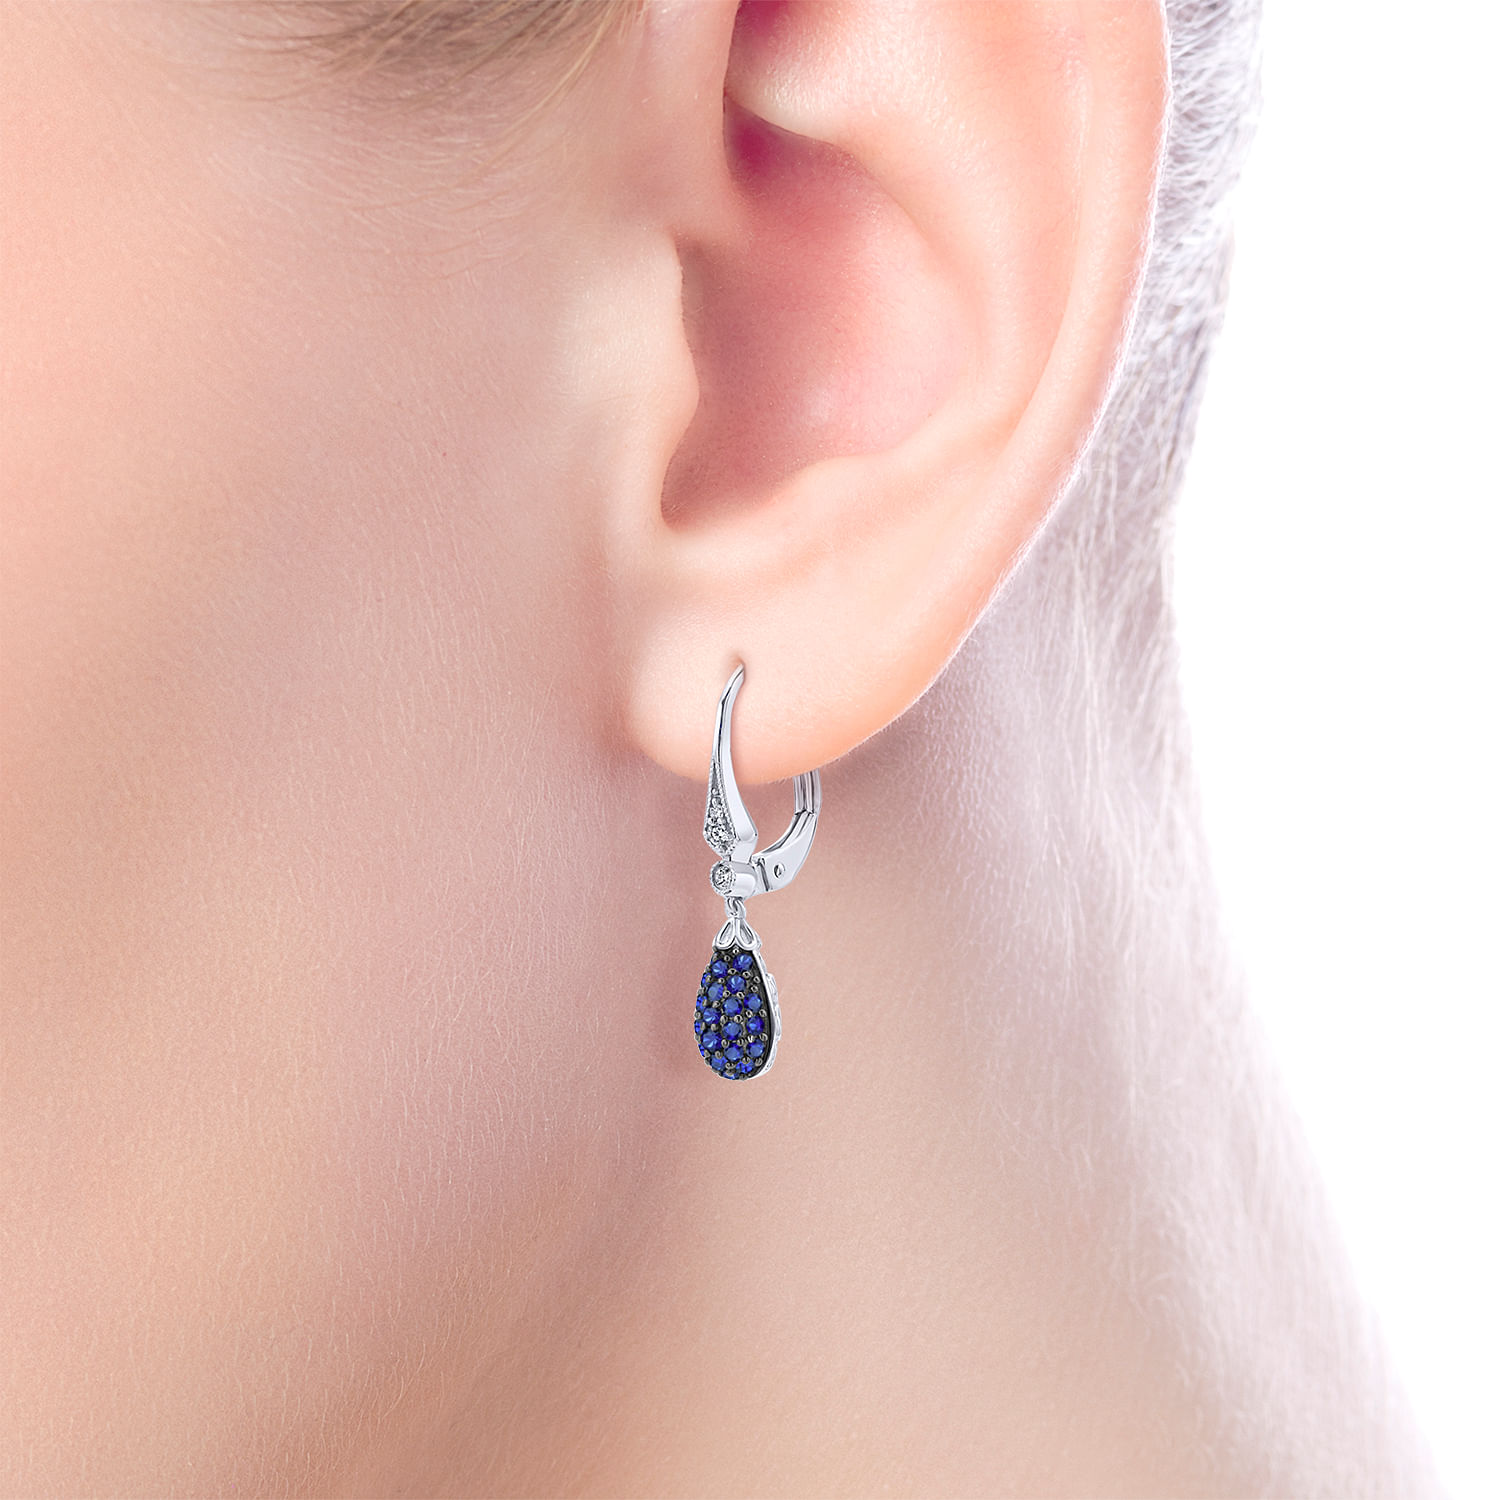 14K White Gold Diamond and Sapphire Cluster Drop Earrings